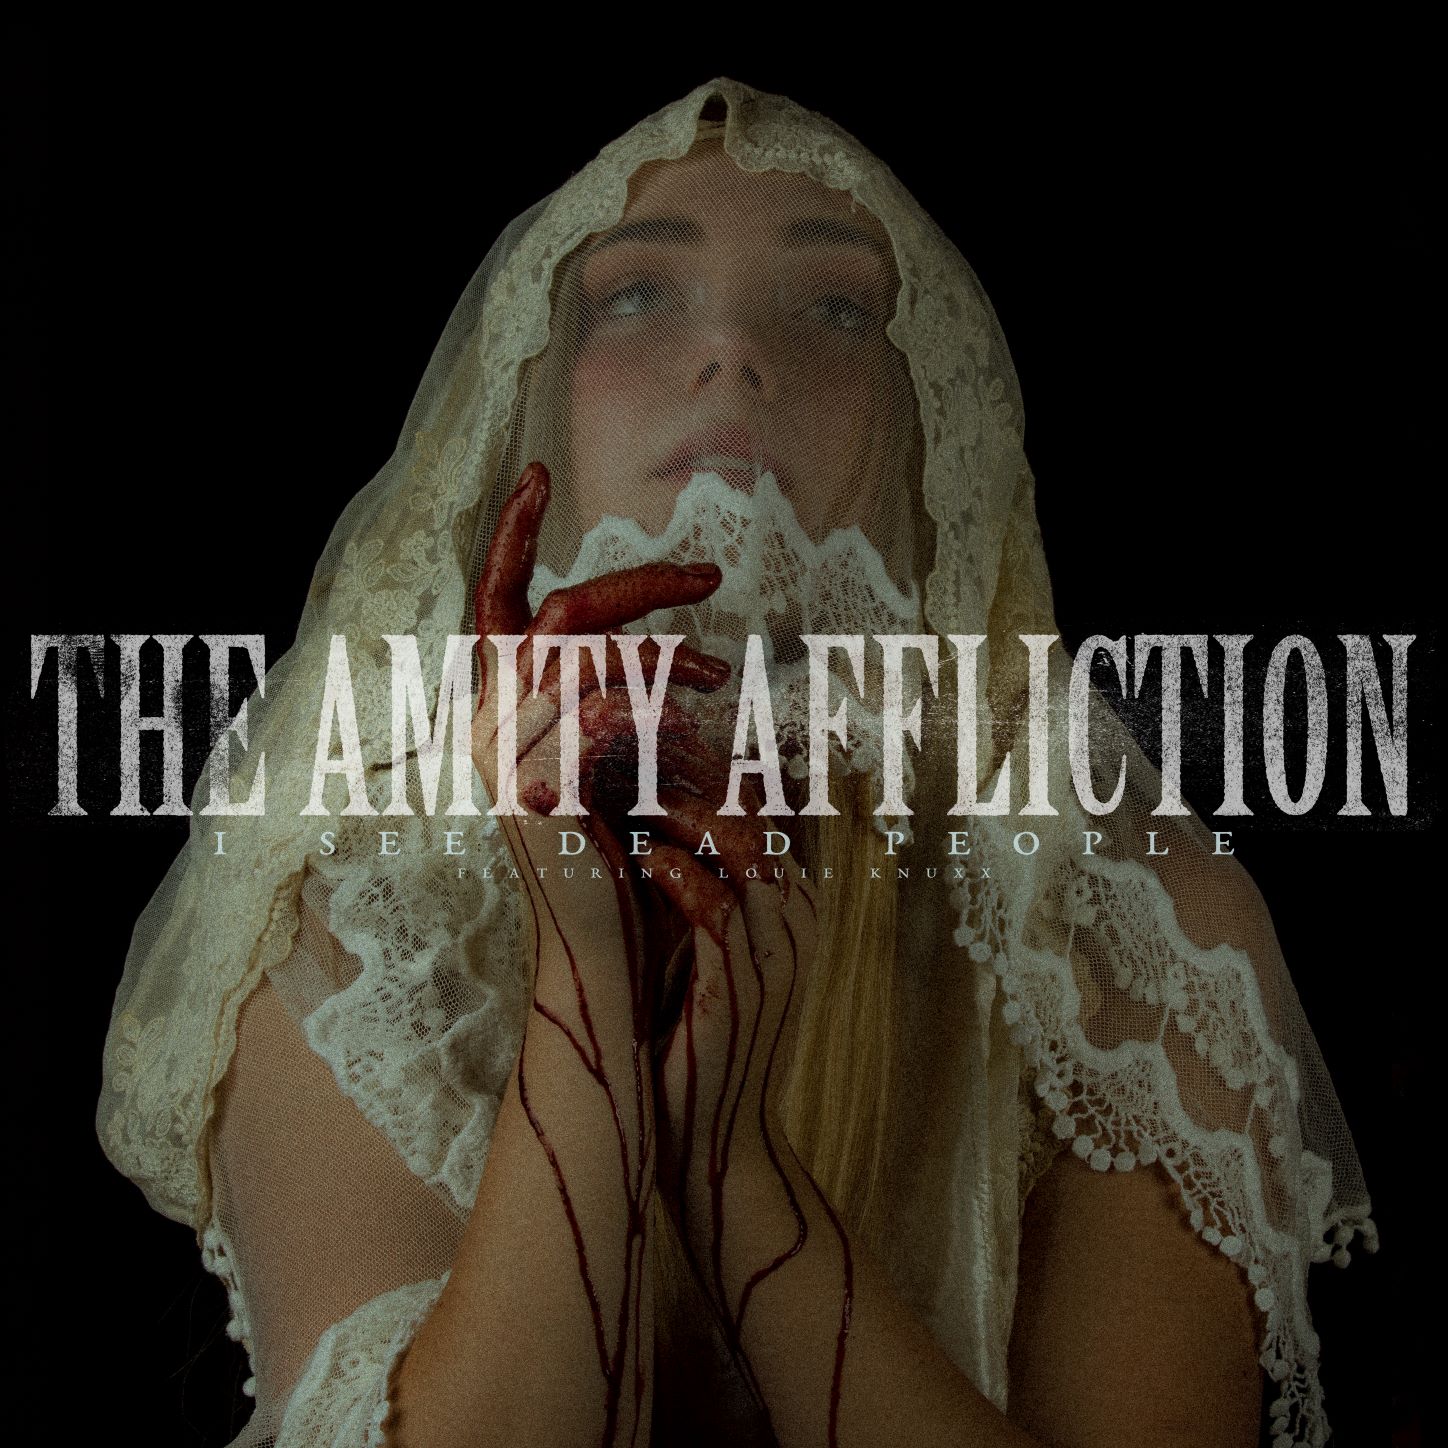 The artwork for The Amity Affliction 'I See Dead People'